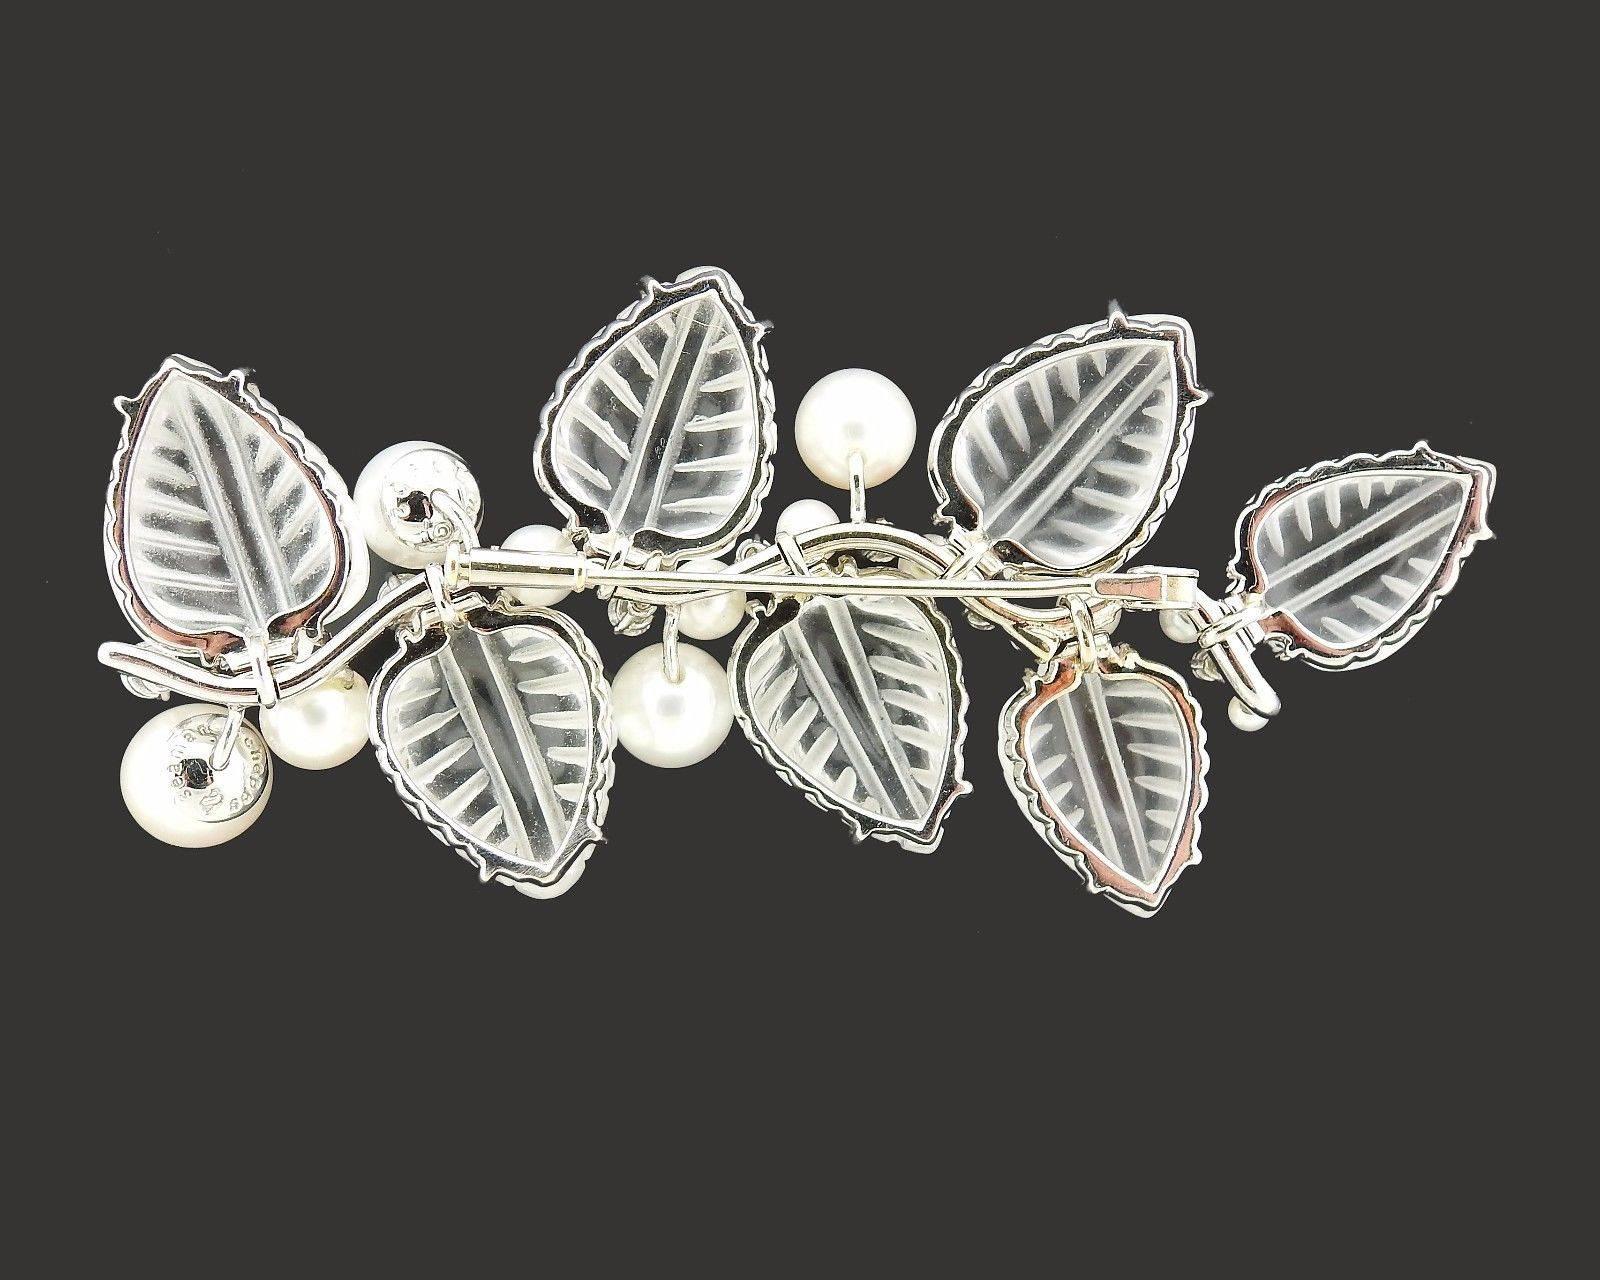 An 18k white gold brooch set with carved crystal leaves, pearls (2.5mm - 9mm) and approximately 0.80ctw of G/VS diamonds.  The brooch measures 85mm x 40mm and weighs 43.2 grams.  Marked: 10902, 750, Shell hallmark, Seaman Schepps.